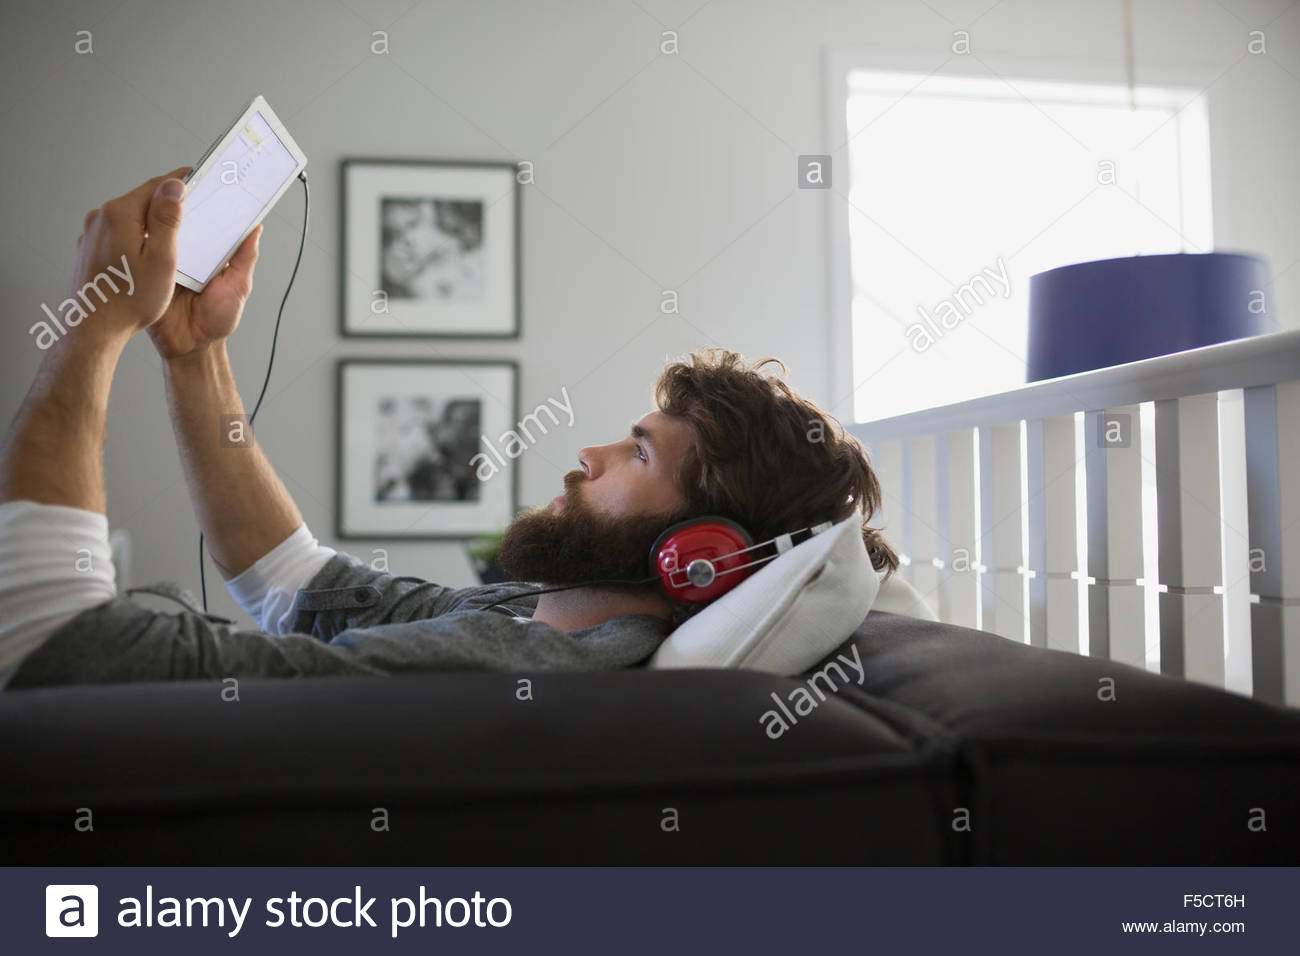 Man with digital tablet headphones listening to music Stock Photo